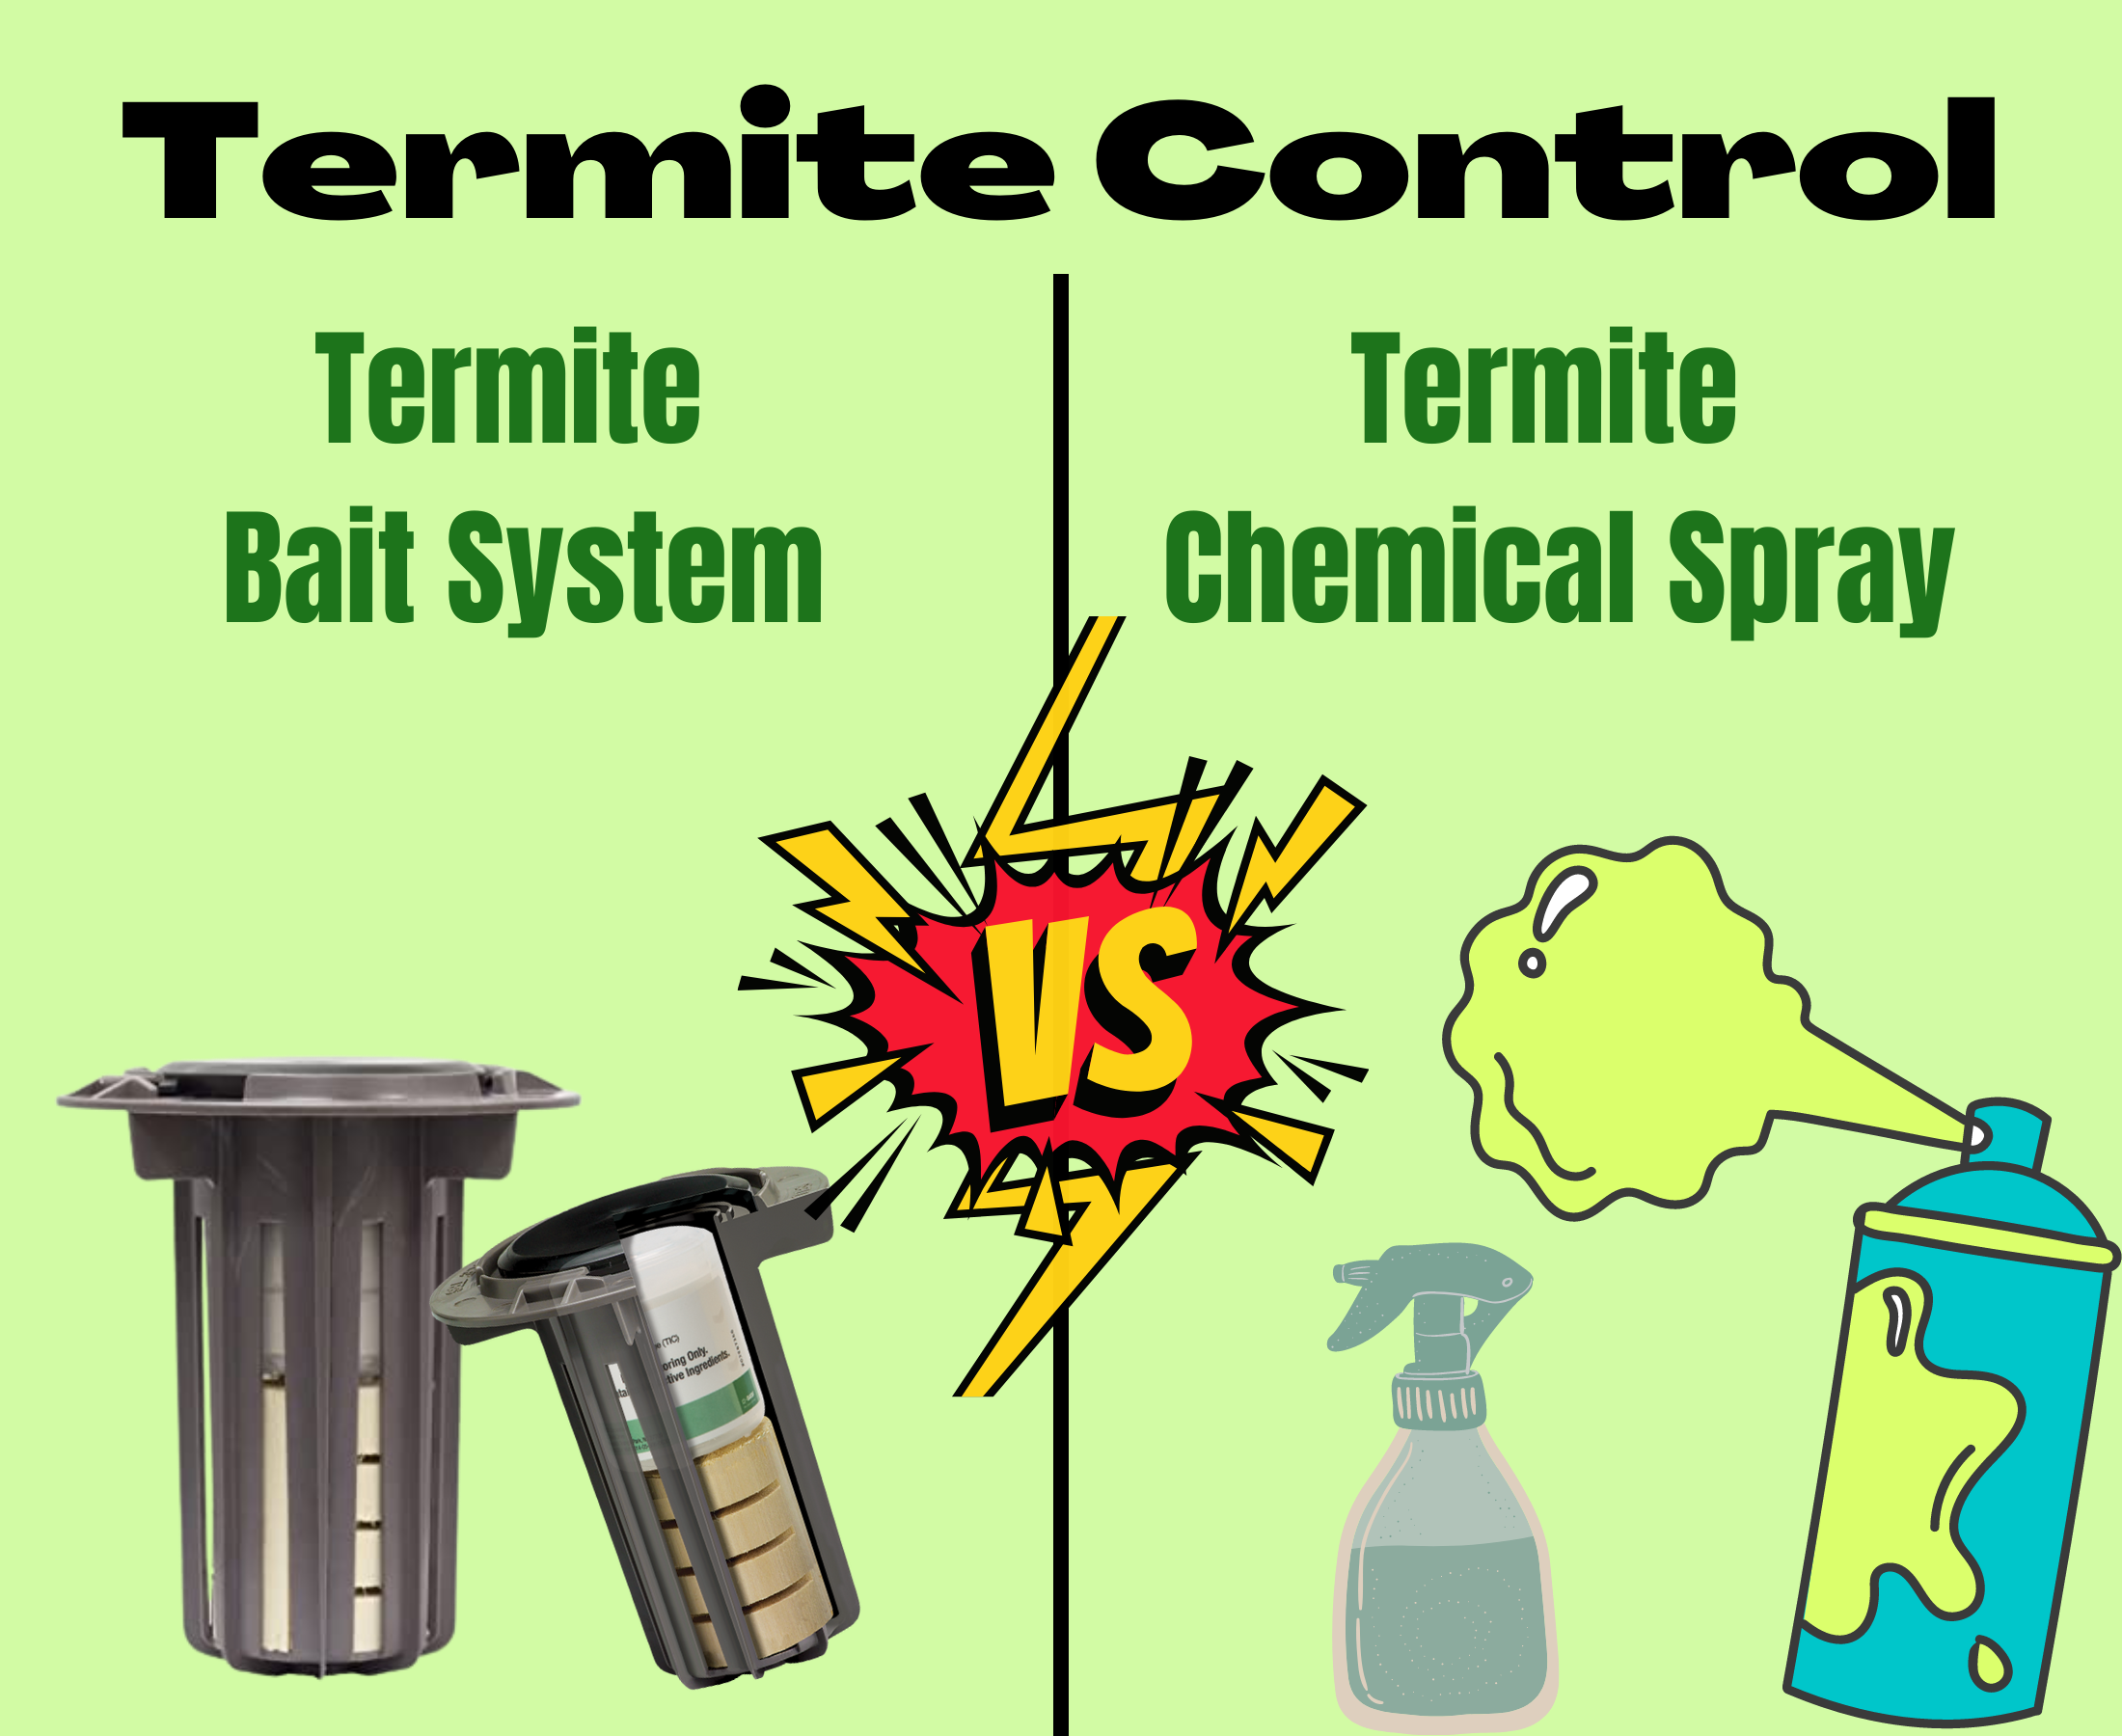 Everything you are curious about termite control